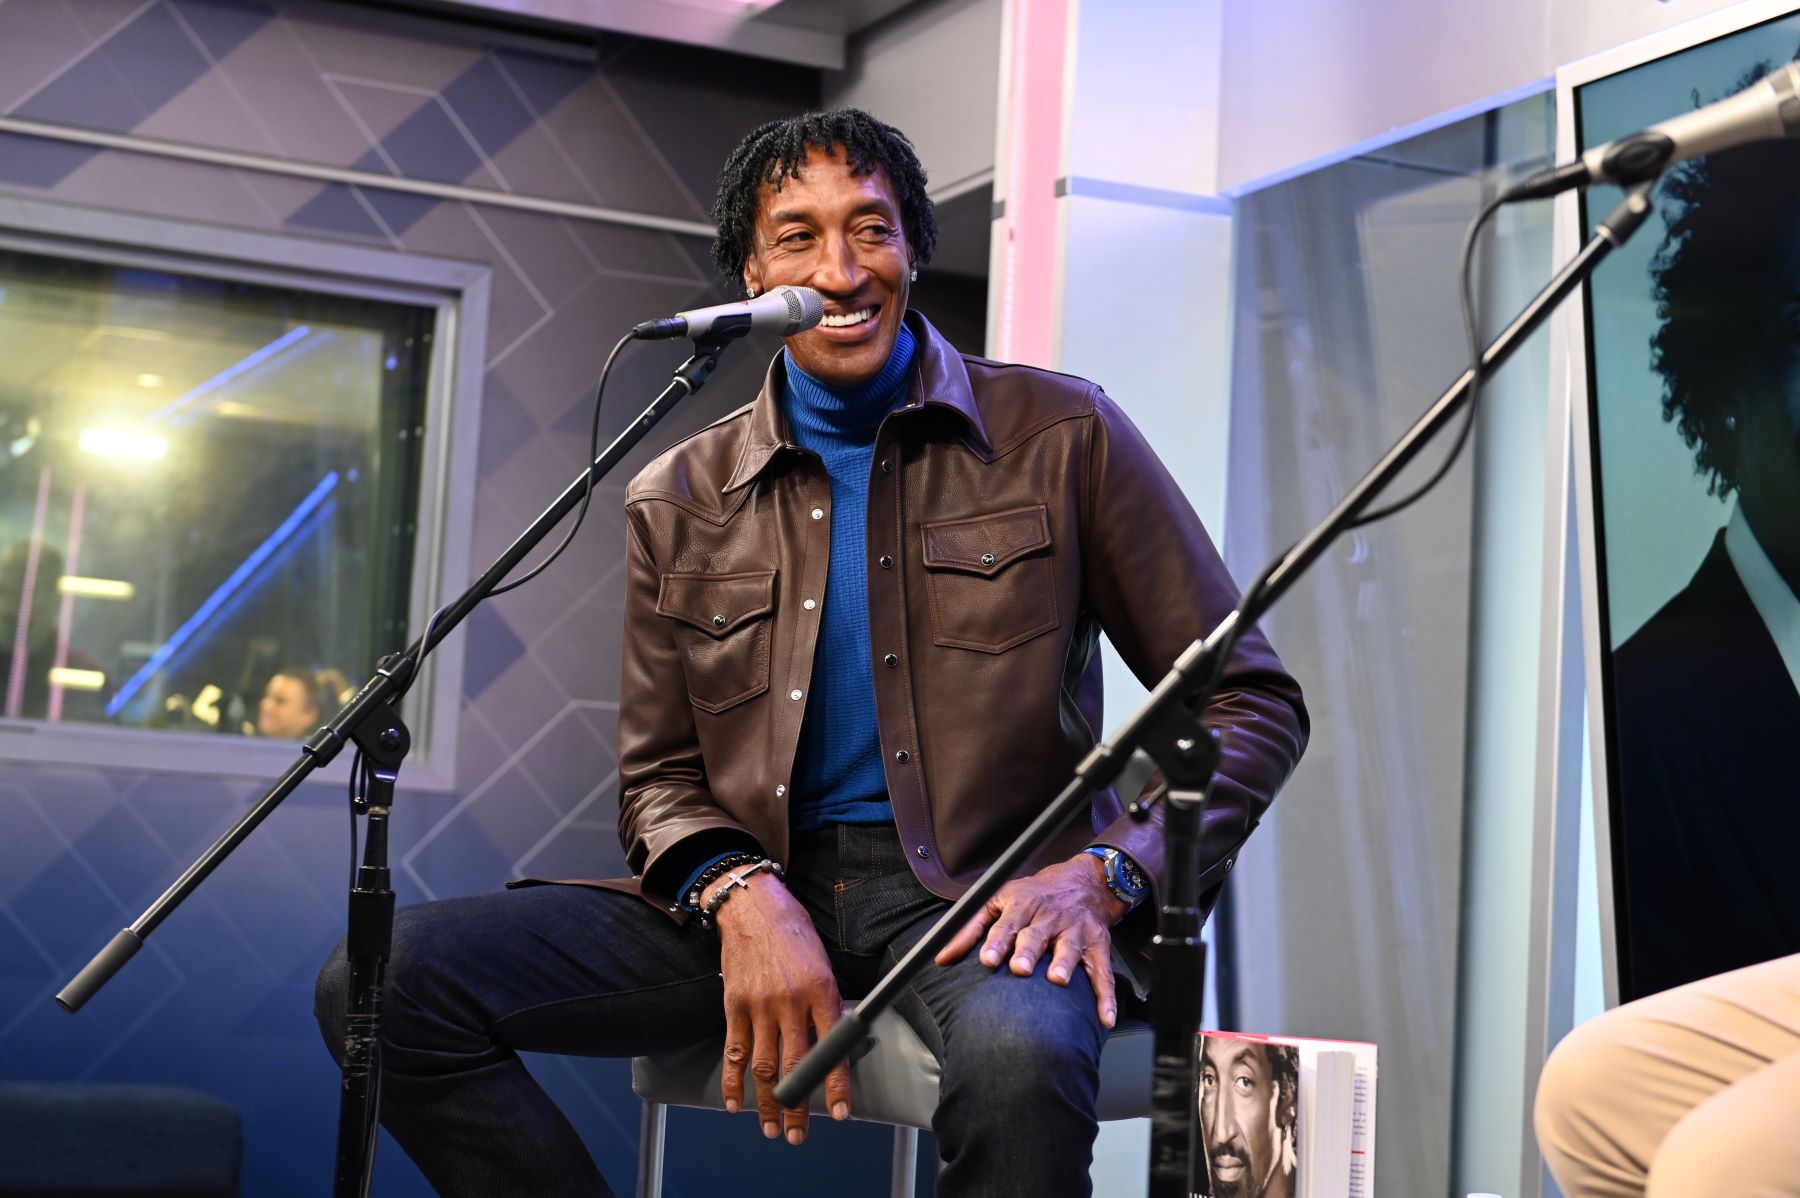 Scottie Pippen at SiriusXM Town Hall promoting book and net worth